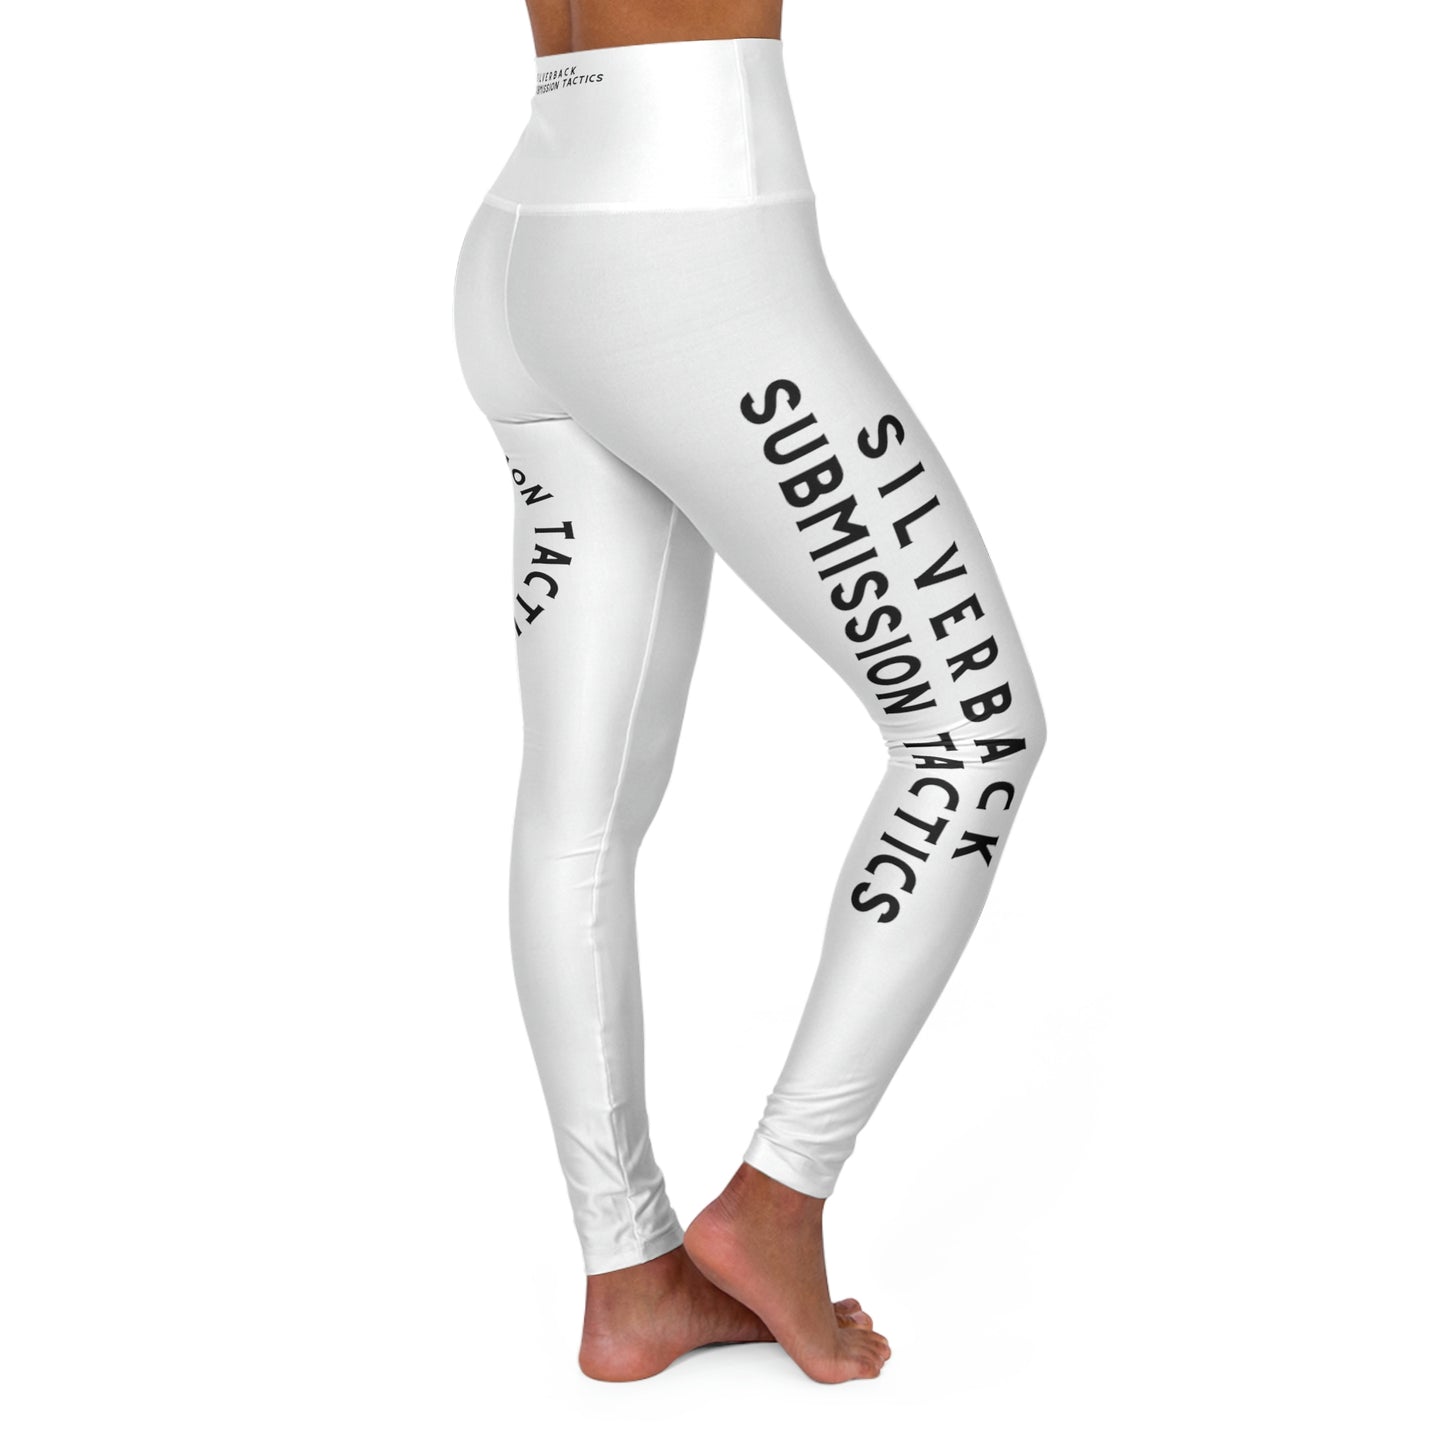 Women's Ranked High Waisted Silverback Submission Tactics Yoga Leggings